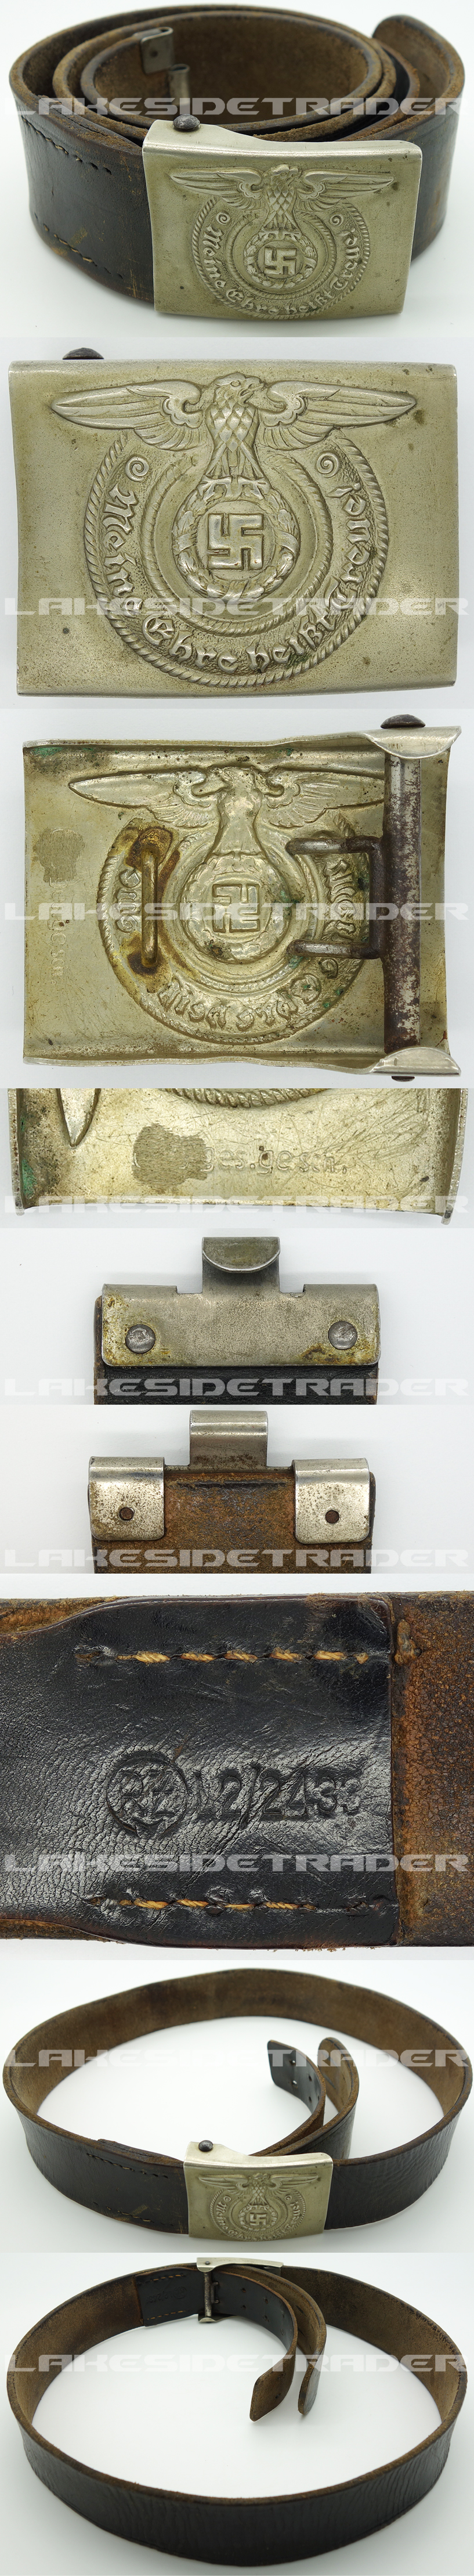 SS EM/NCO Belt and Buckle by Overhoff & Cie.